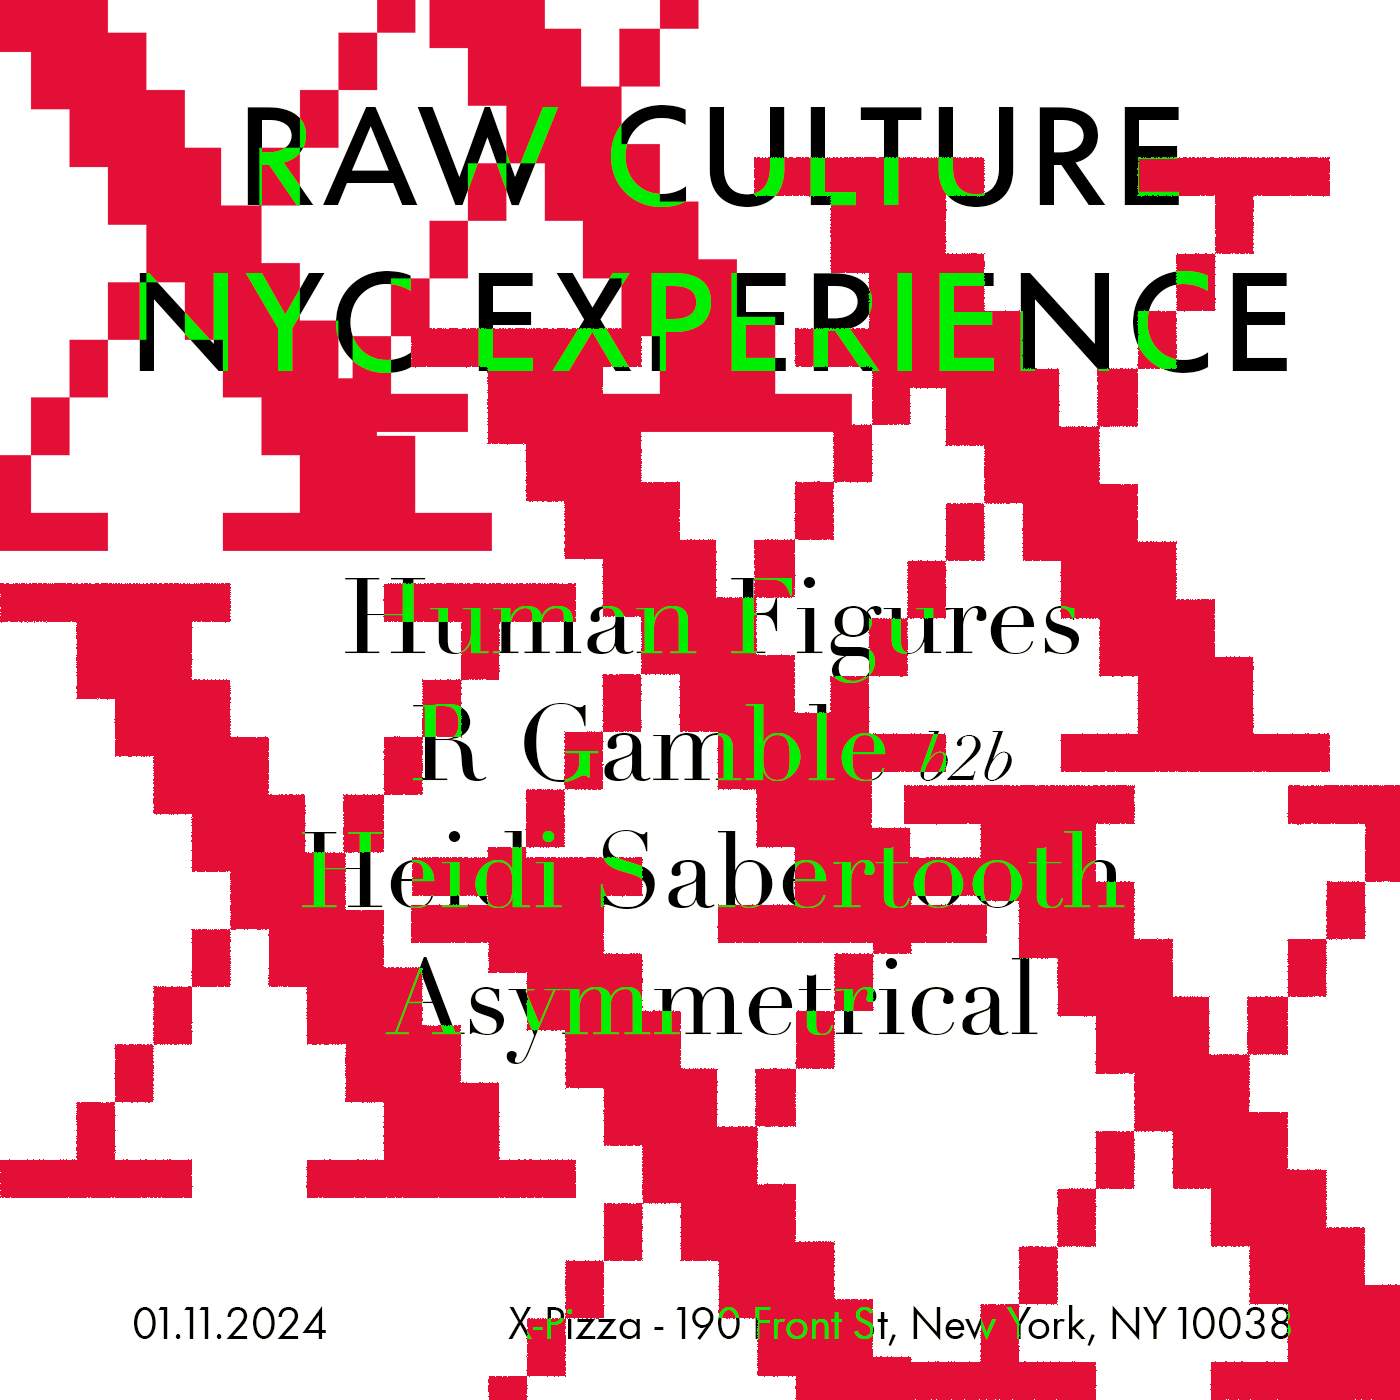 Raw Culture Records NYC Experience at X-Pizza - フライヤー表